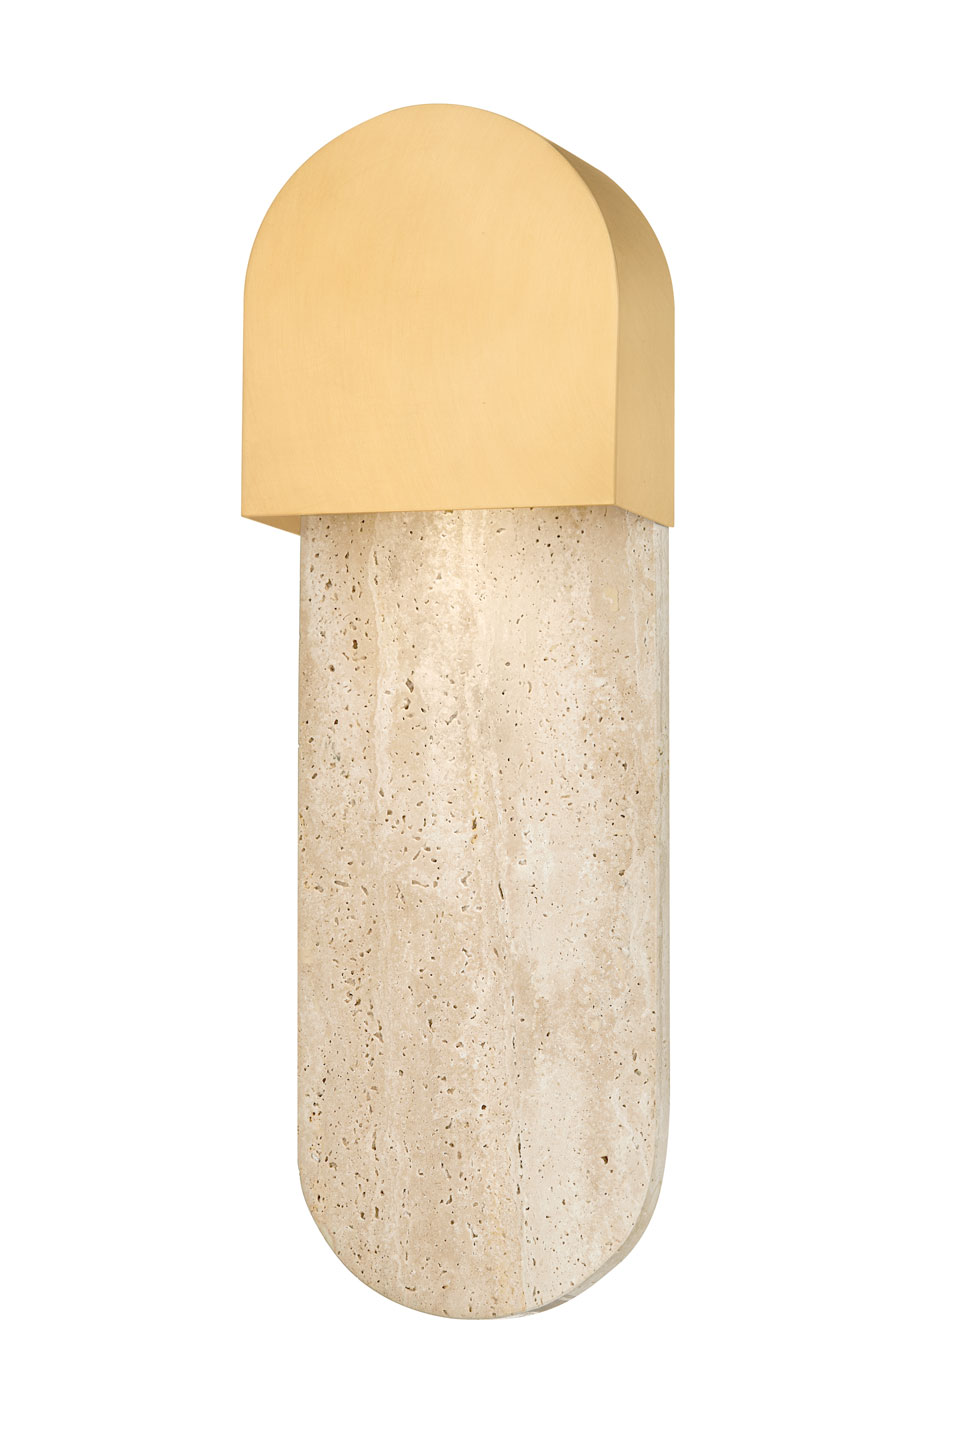 Gold and travertine wall light Hobart. Hudson Valley. 